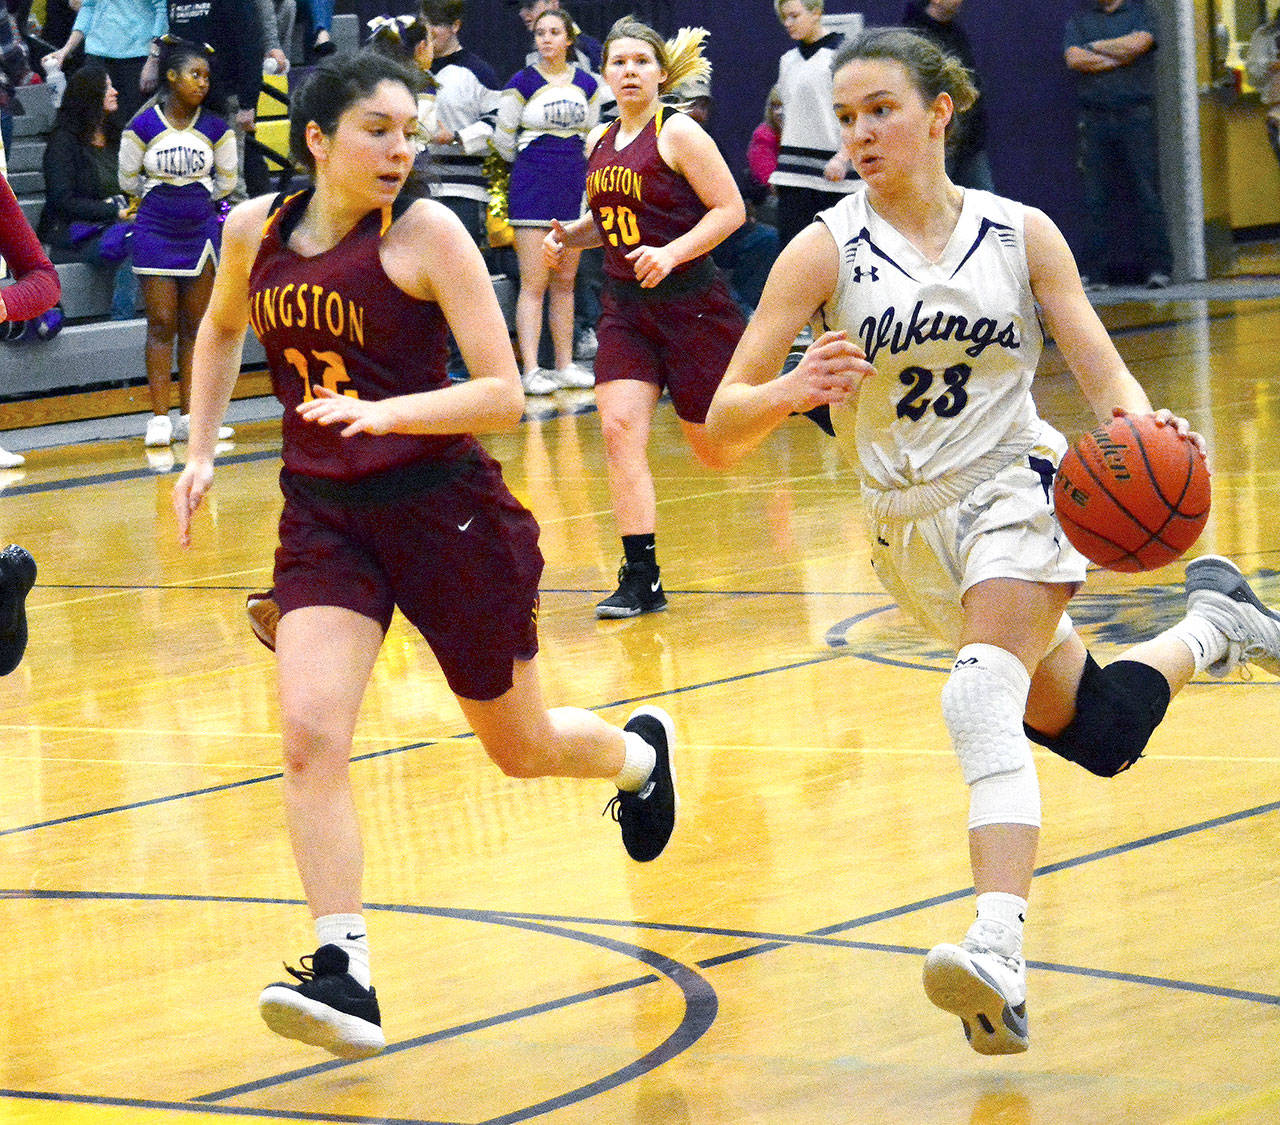 Raelee Moore (23) of North Kitsap on the fast break as Kingston’s Lily Beaulieu (12) attempts to stop her. (Mark Krulish/Kitsap News Group)